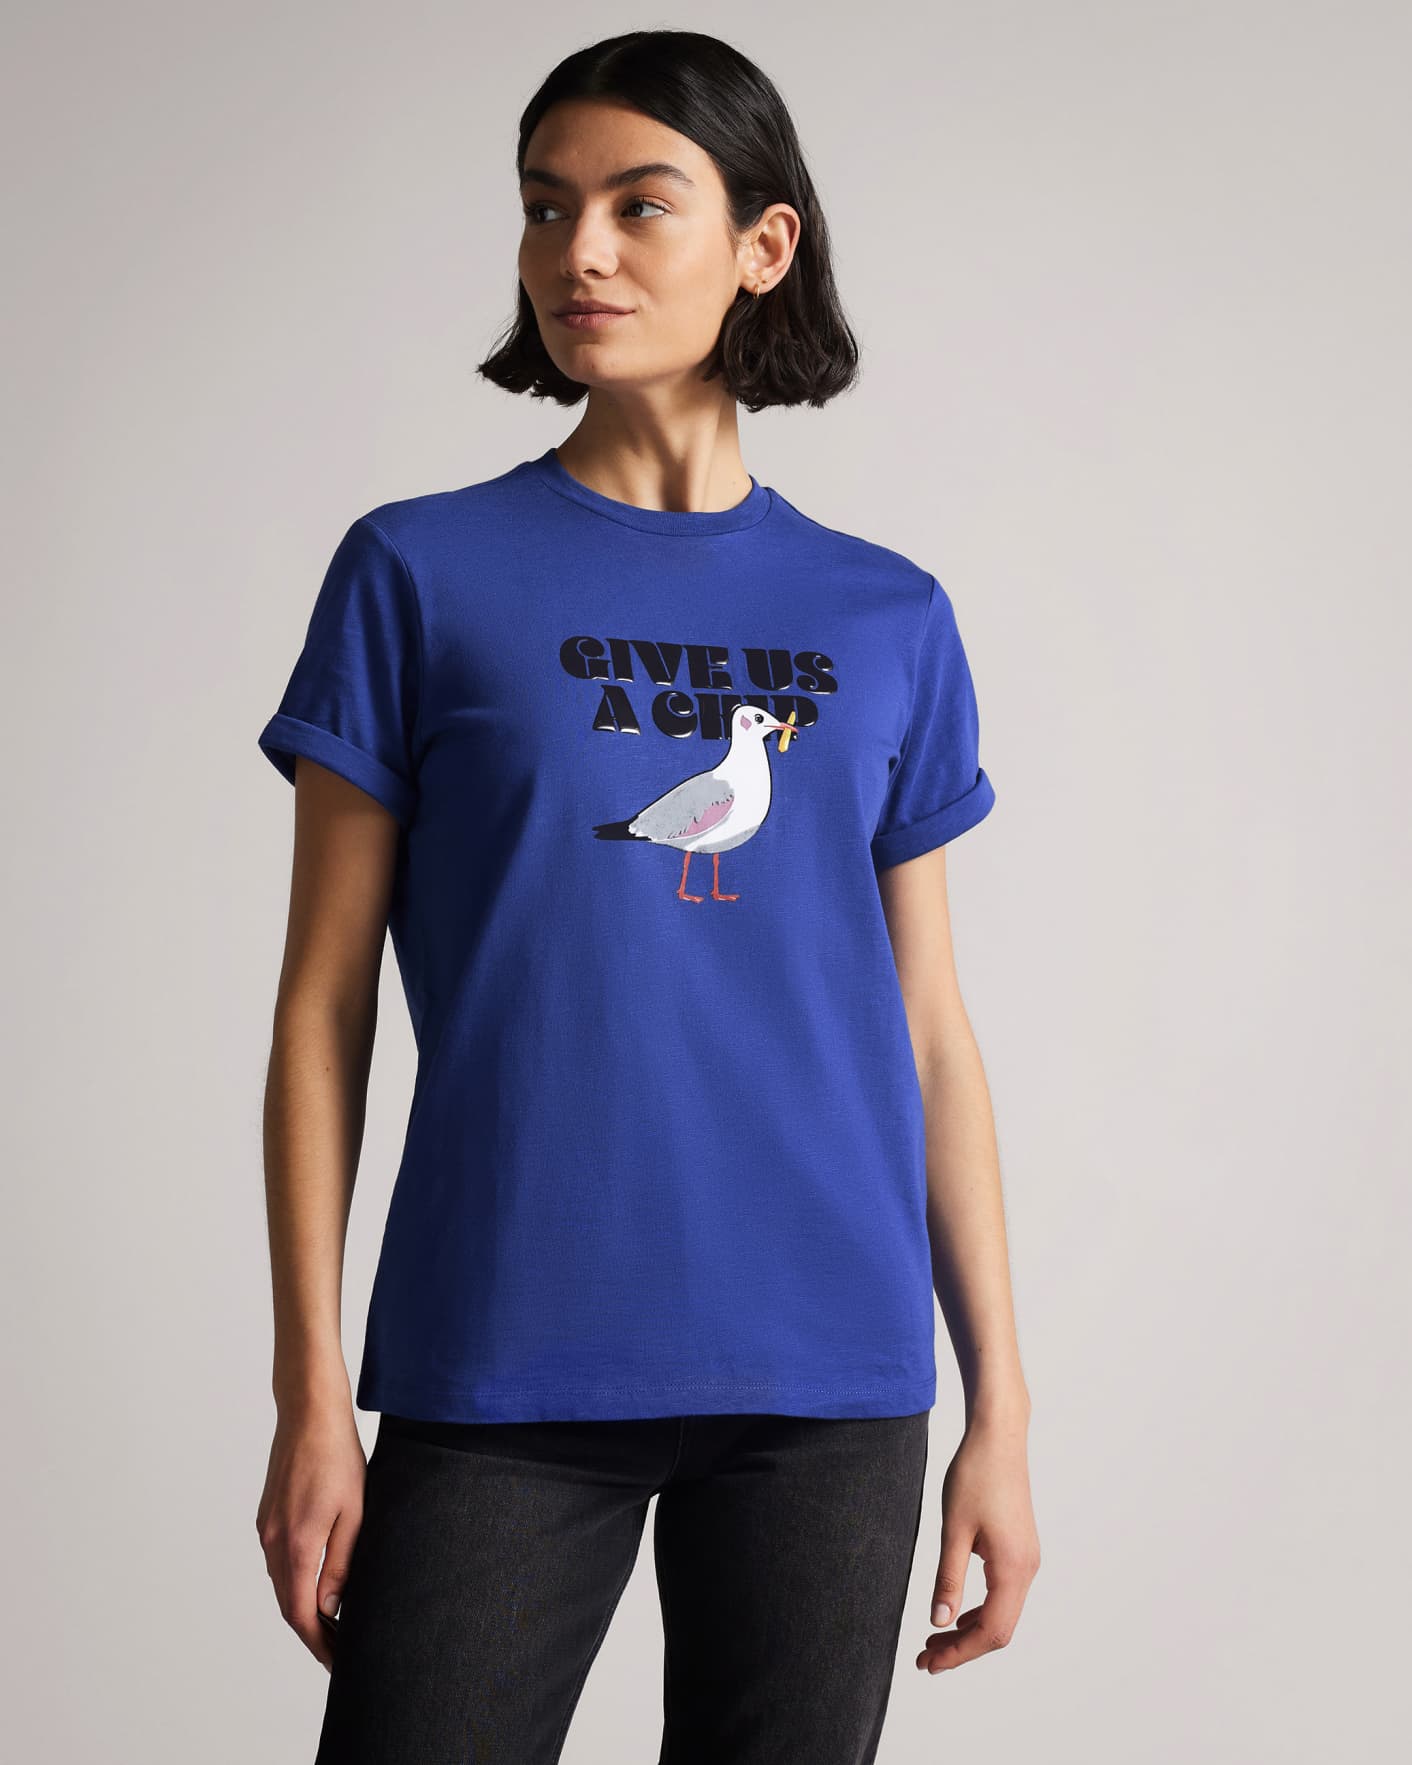 Medium Blue Give Us A Chip Graphic T-Shirt Ted Baker